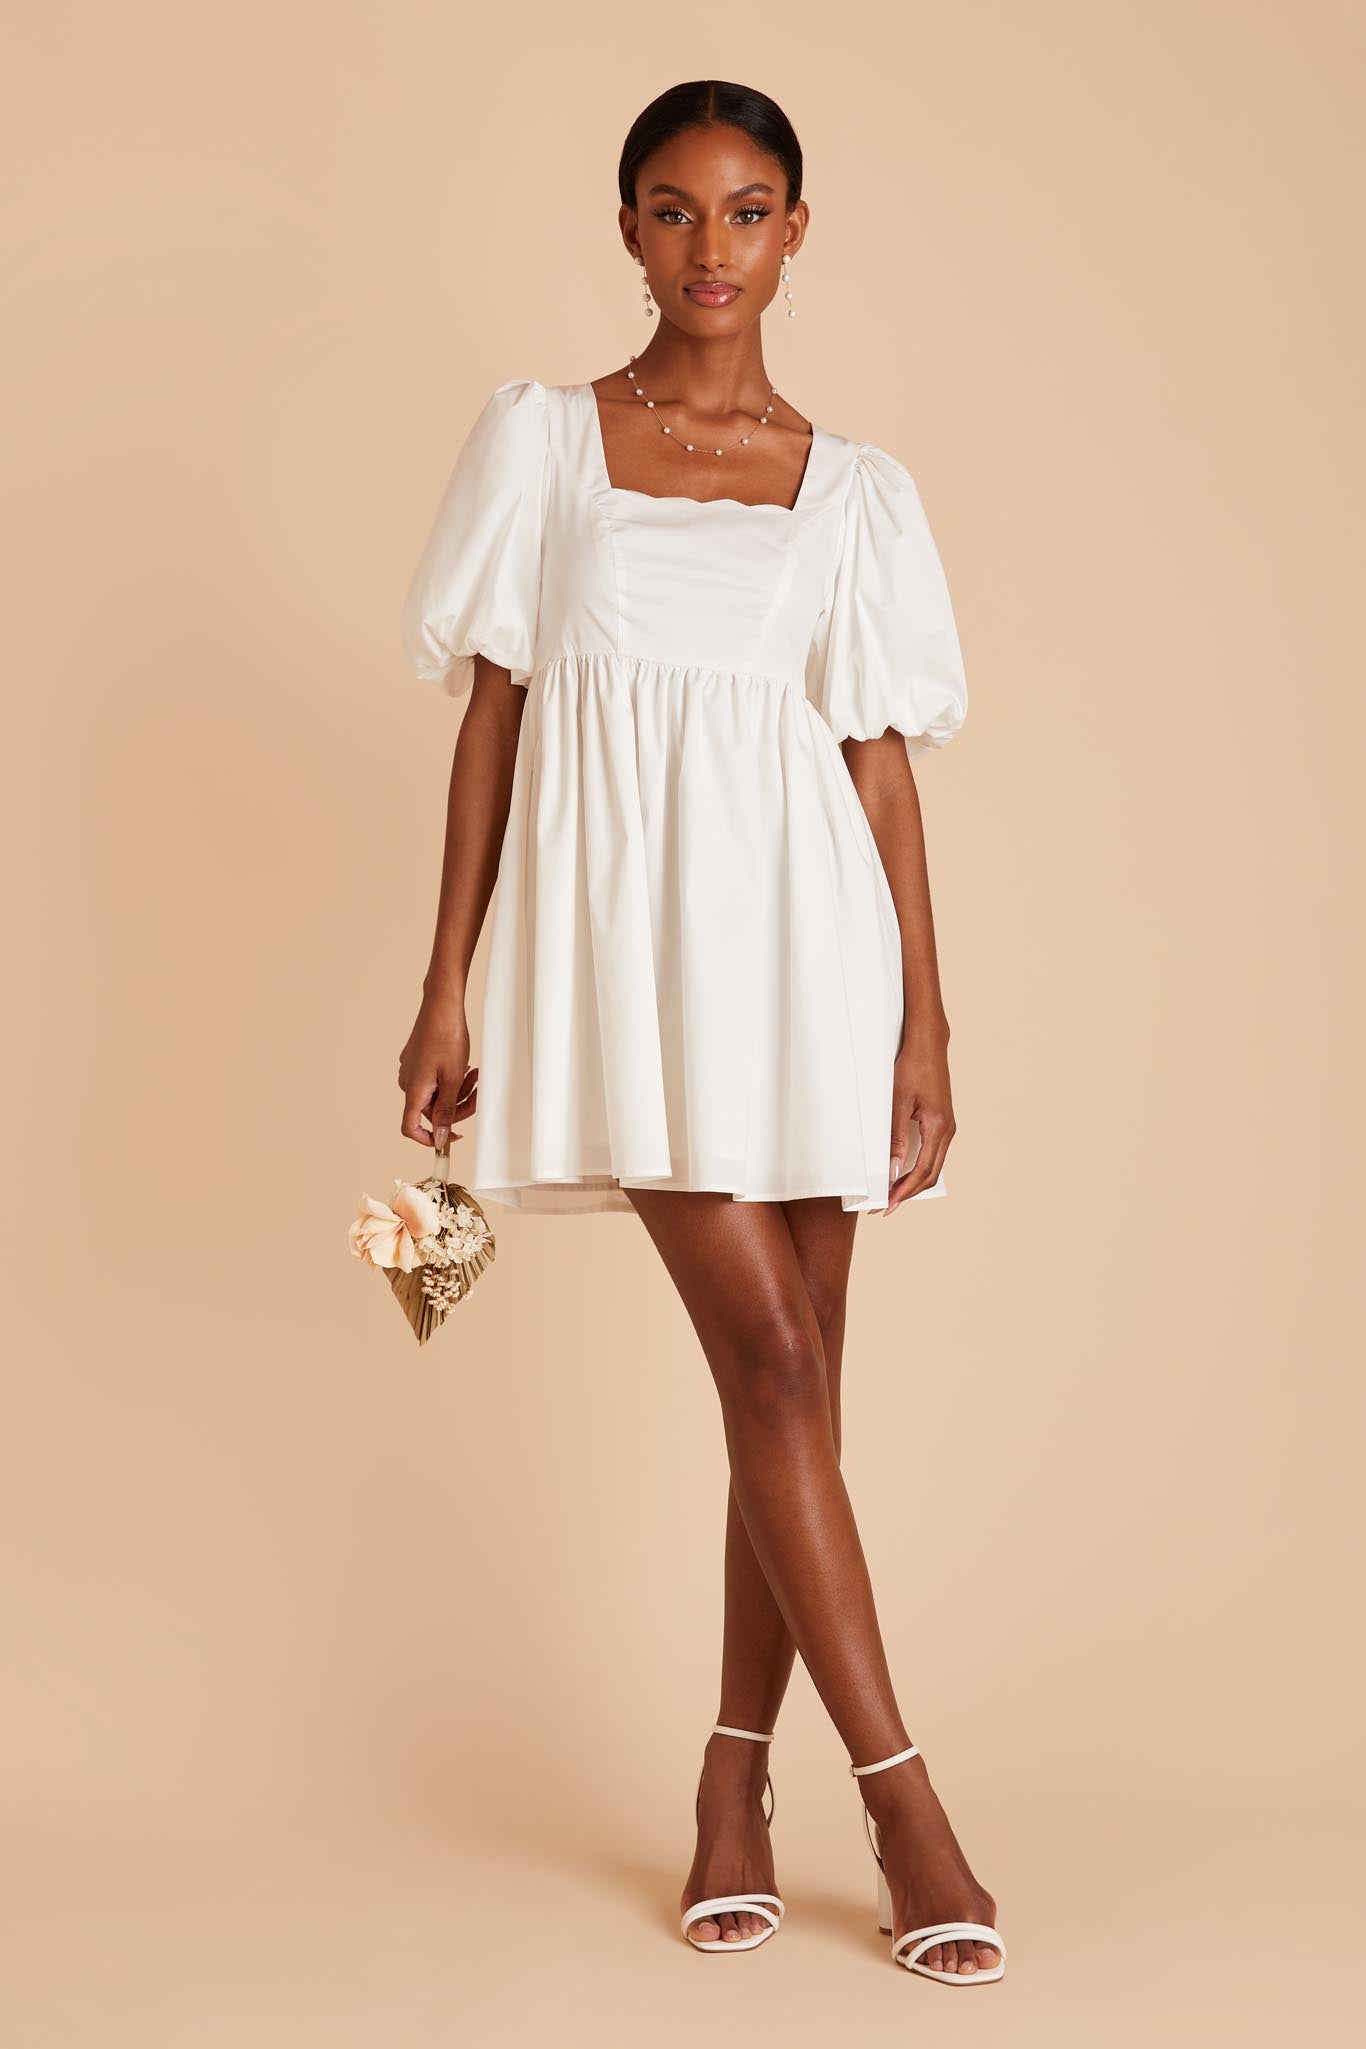 White Mini Dress with Short Balloon Sleeves and Scalloped Neckline by Birdy Grey